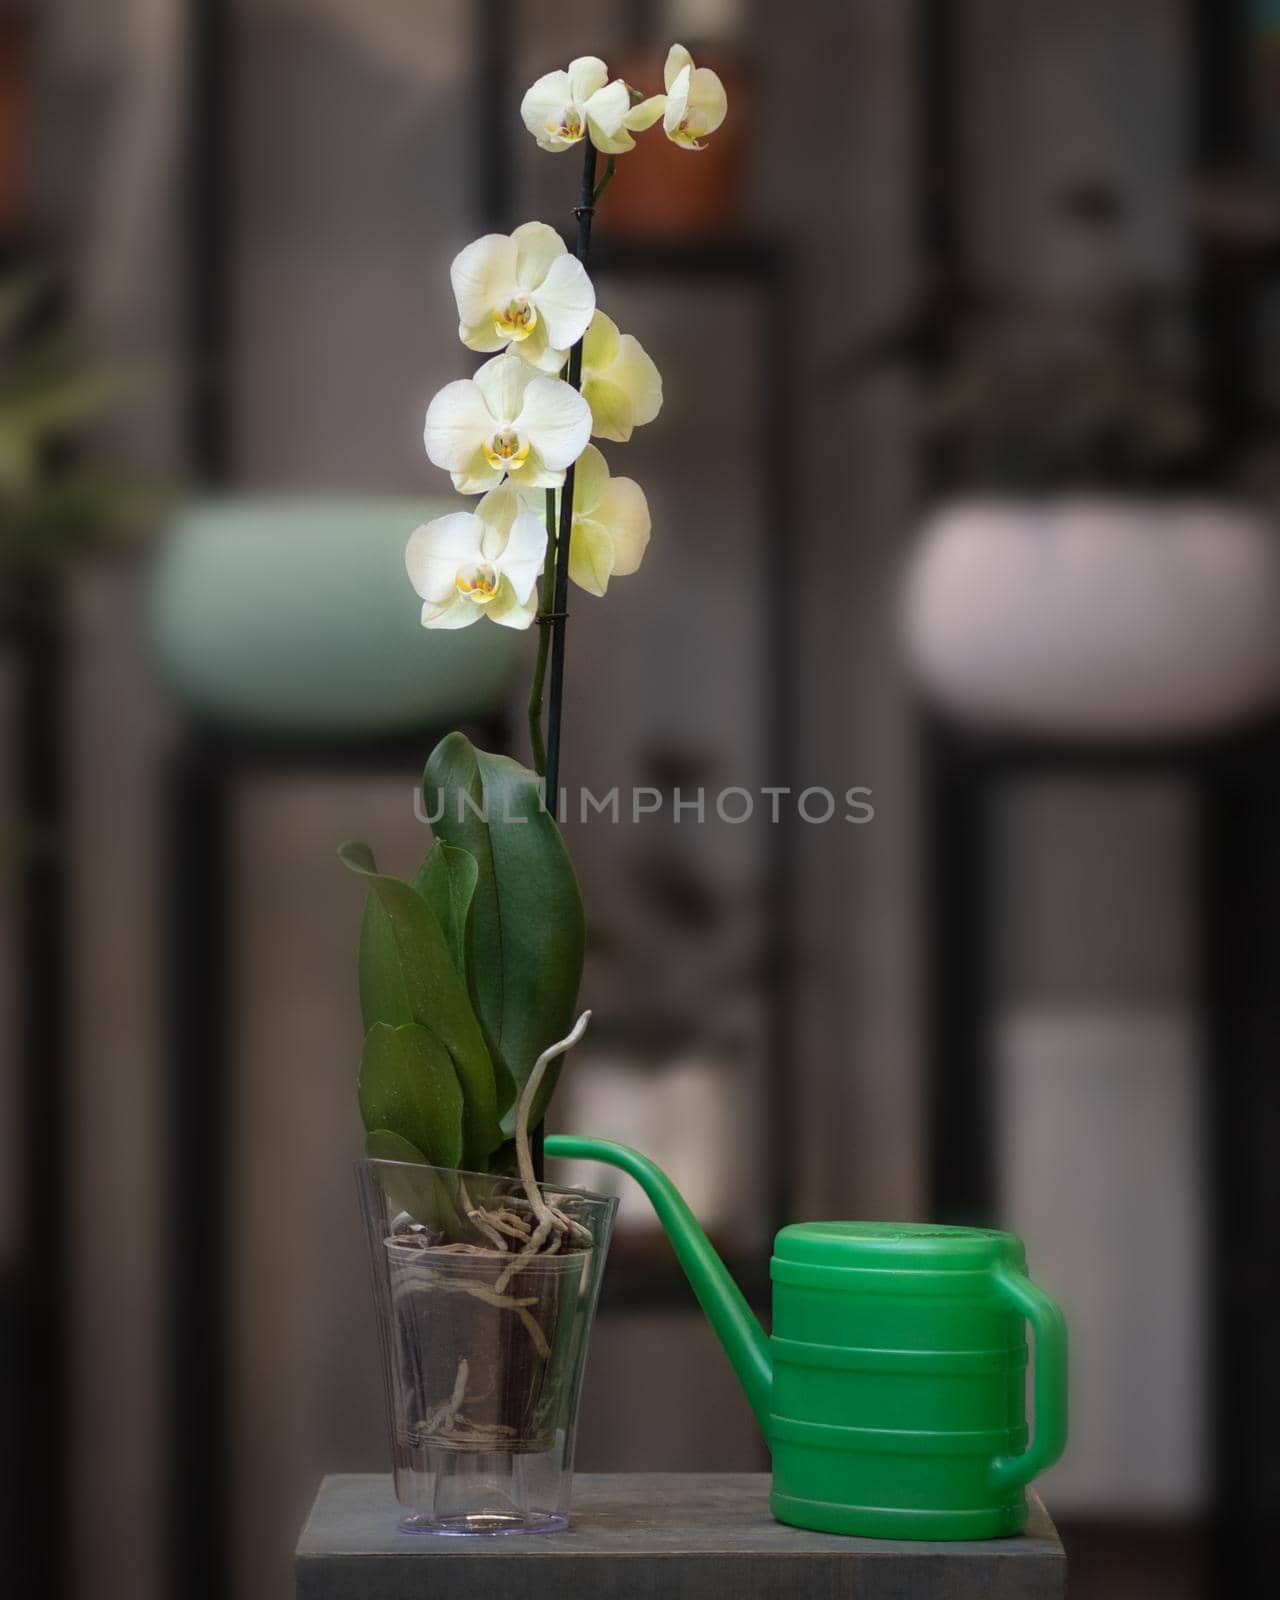 Yellow Phalaenopsis, Moth orchid flowers in the pot with green watering can by ferhad